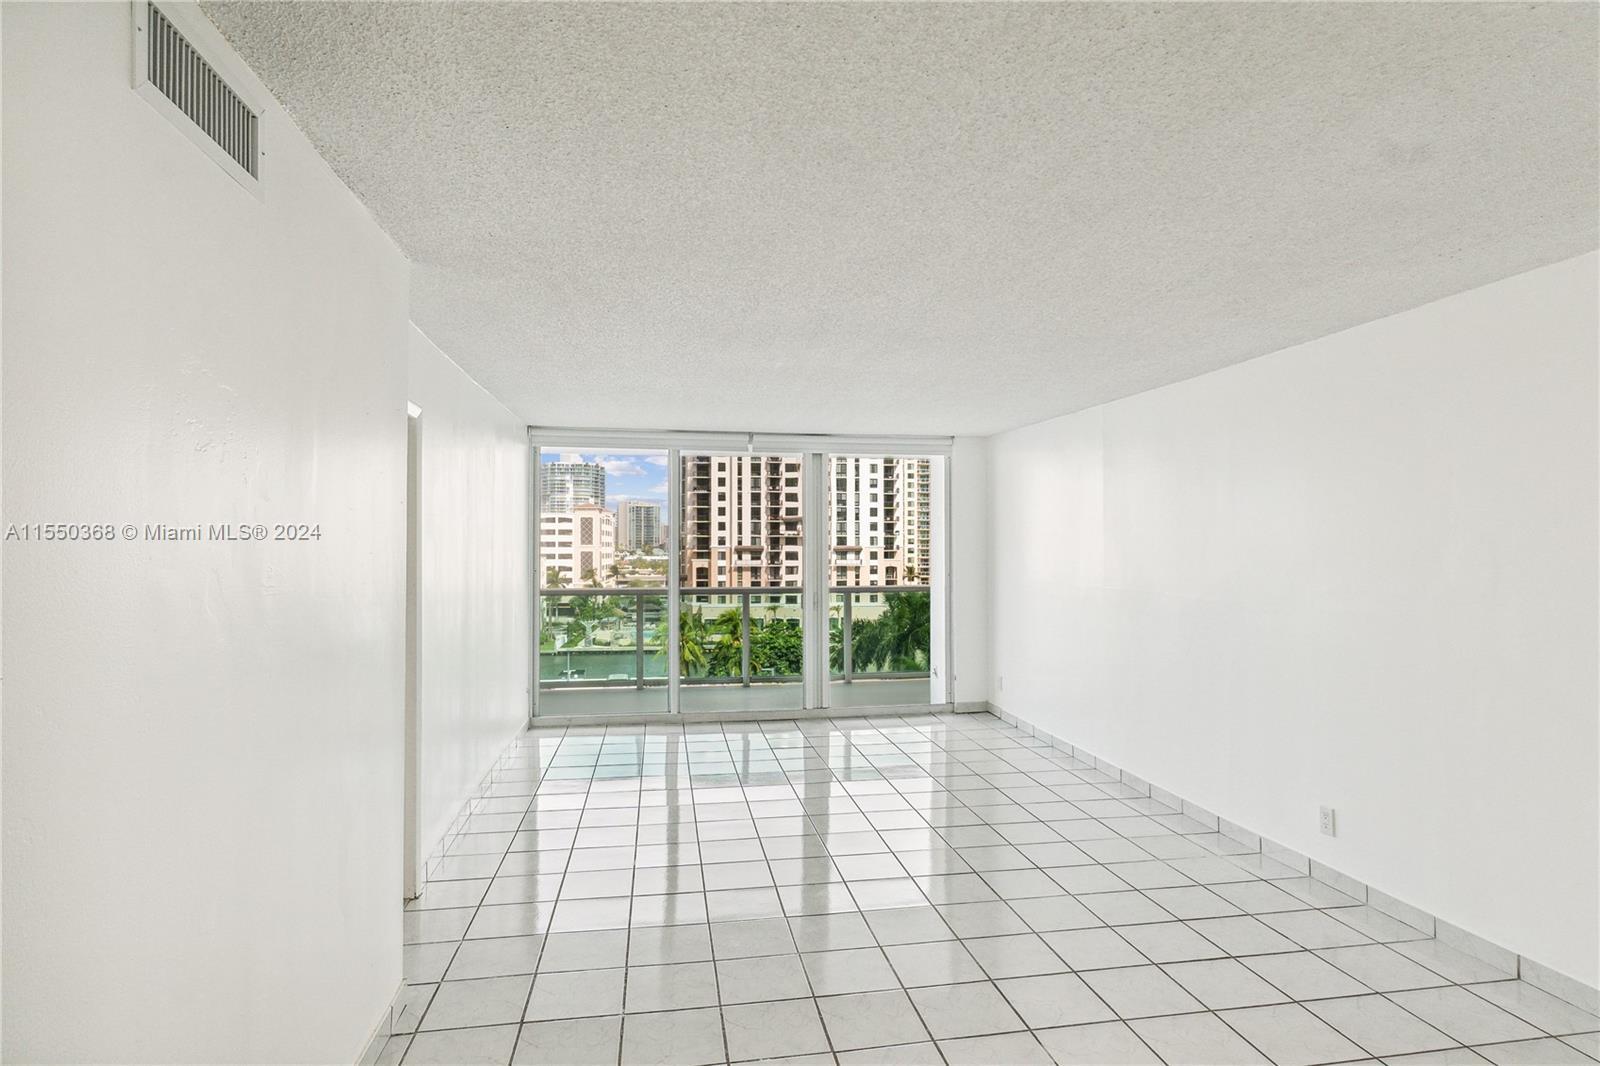 Photo of 100 Bayview Dr #629 in Sunny Isles Beach, FL